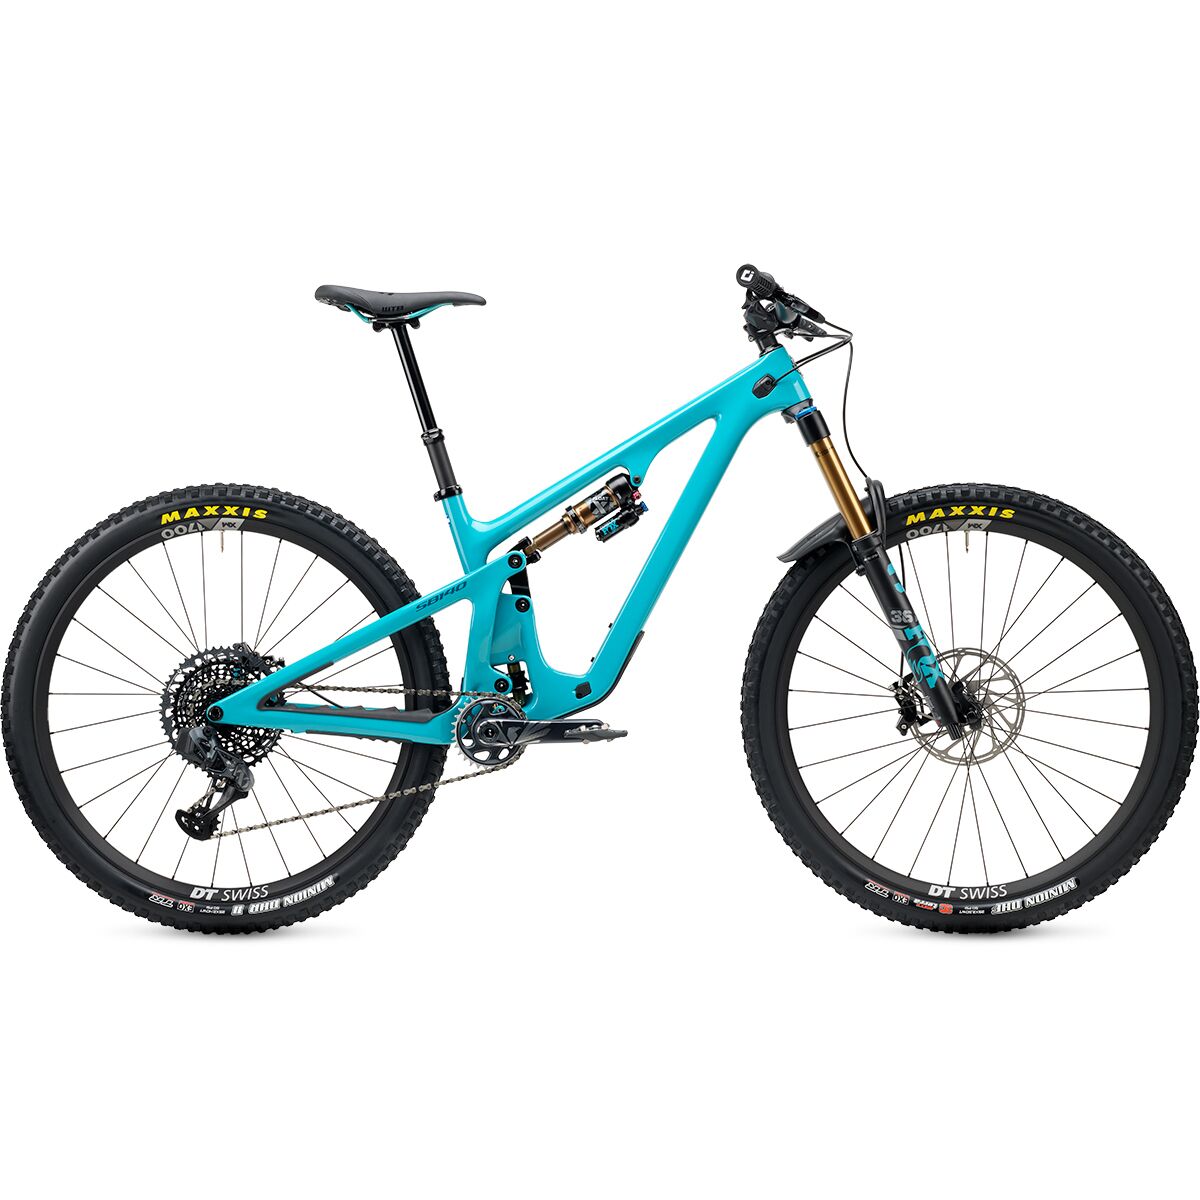 Yeti Cycles SB140 T3 TLR X01 Eagle AXS 29in Mountain Bike